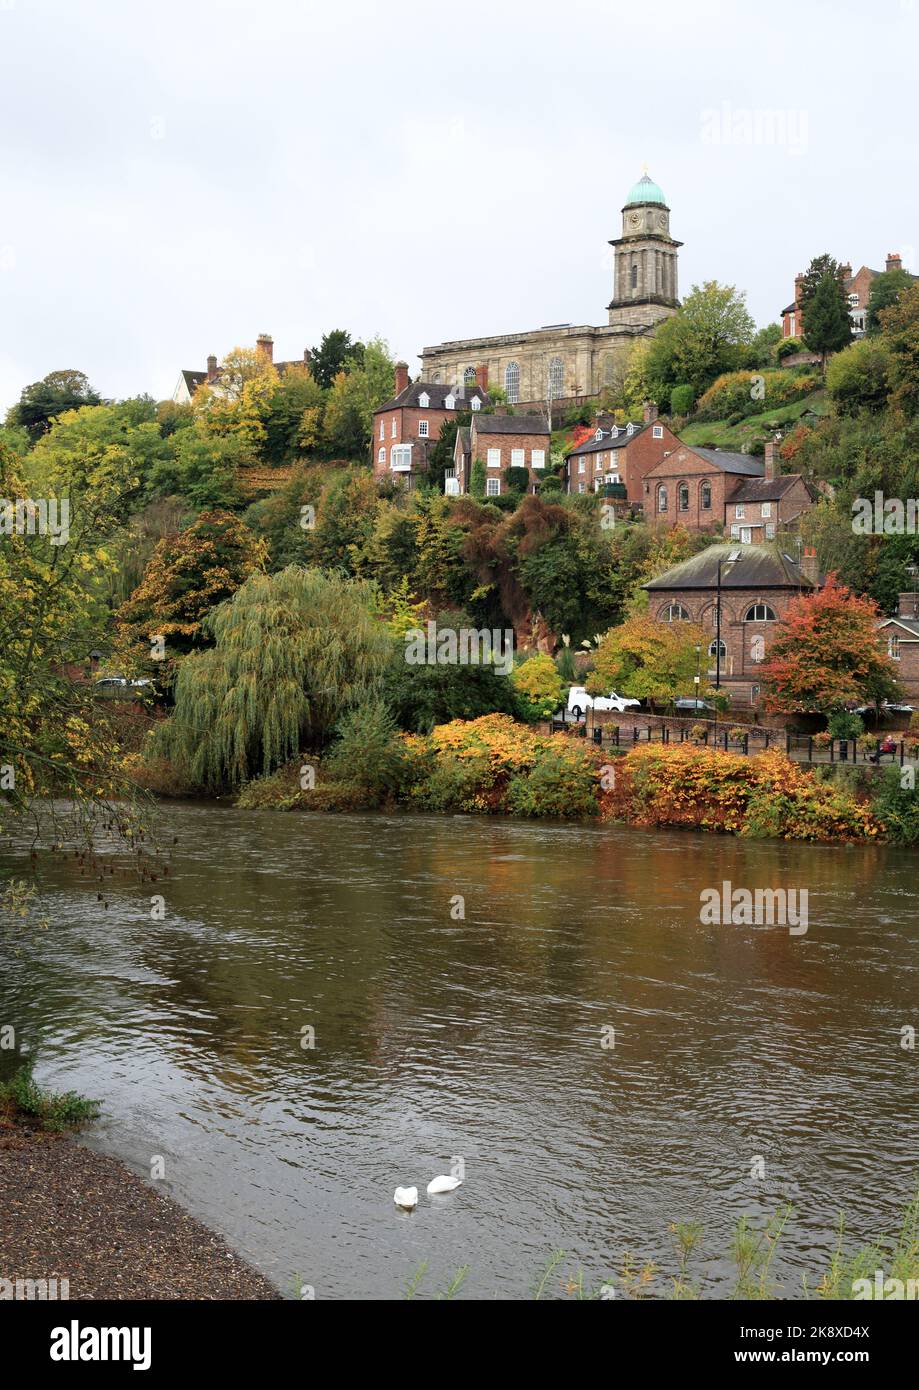 View of Bridgnorth from the bridge over the river Severn, Shropshire, England, UK. Stock Photo